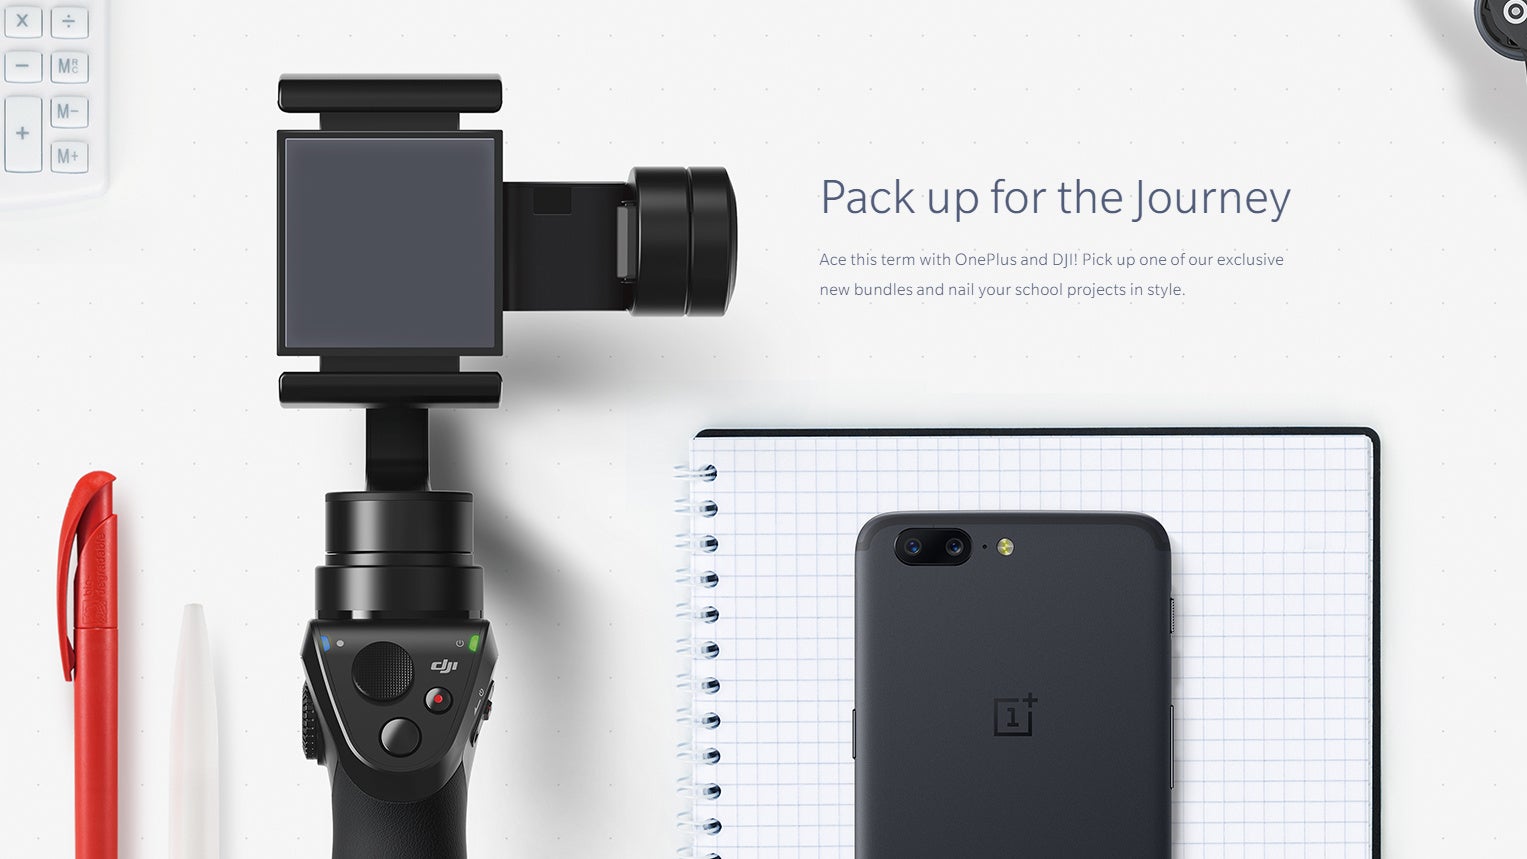 OnePlus 5 back to school promos - OnePlus back to school promo brings bundles with OnePlus 5, DJI drones and stabilizers